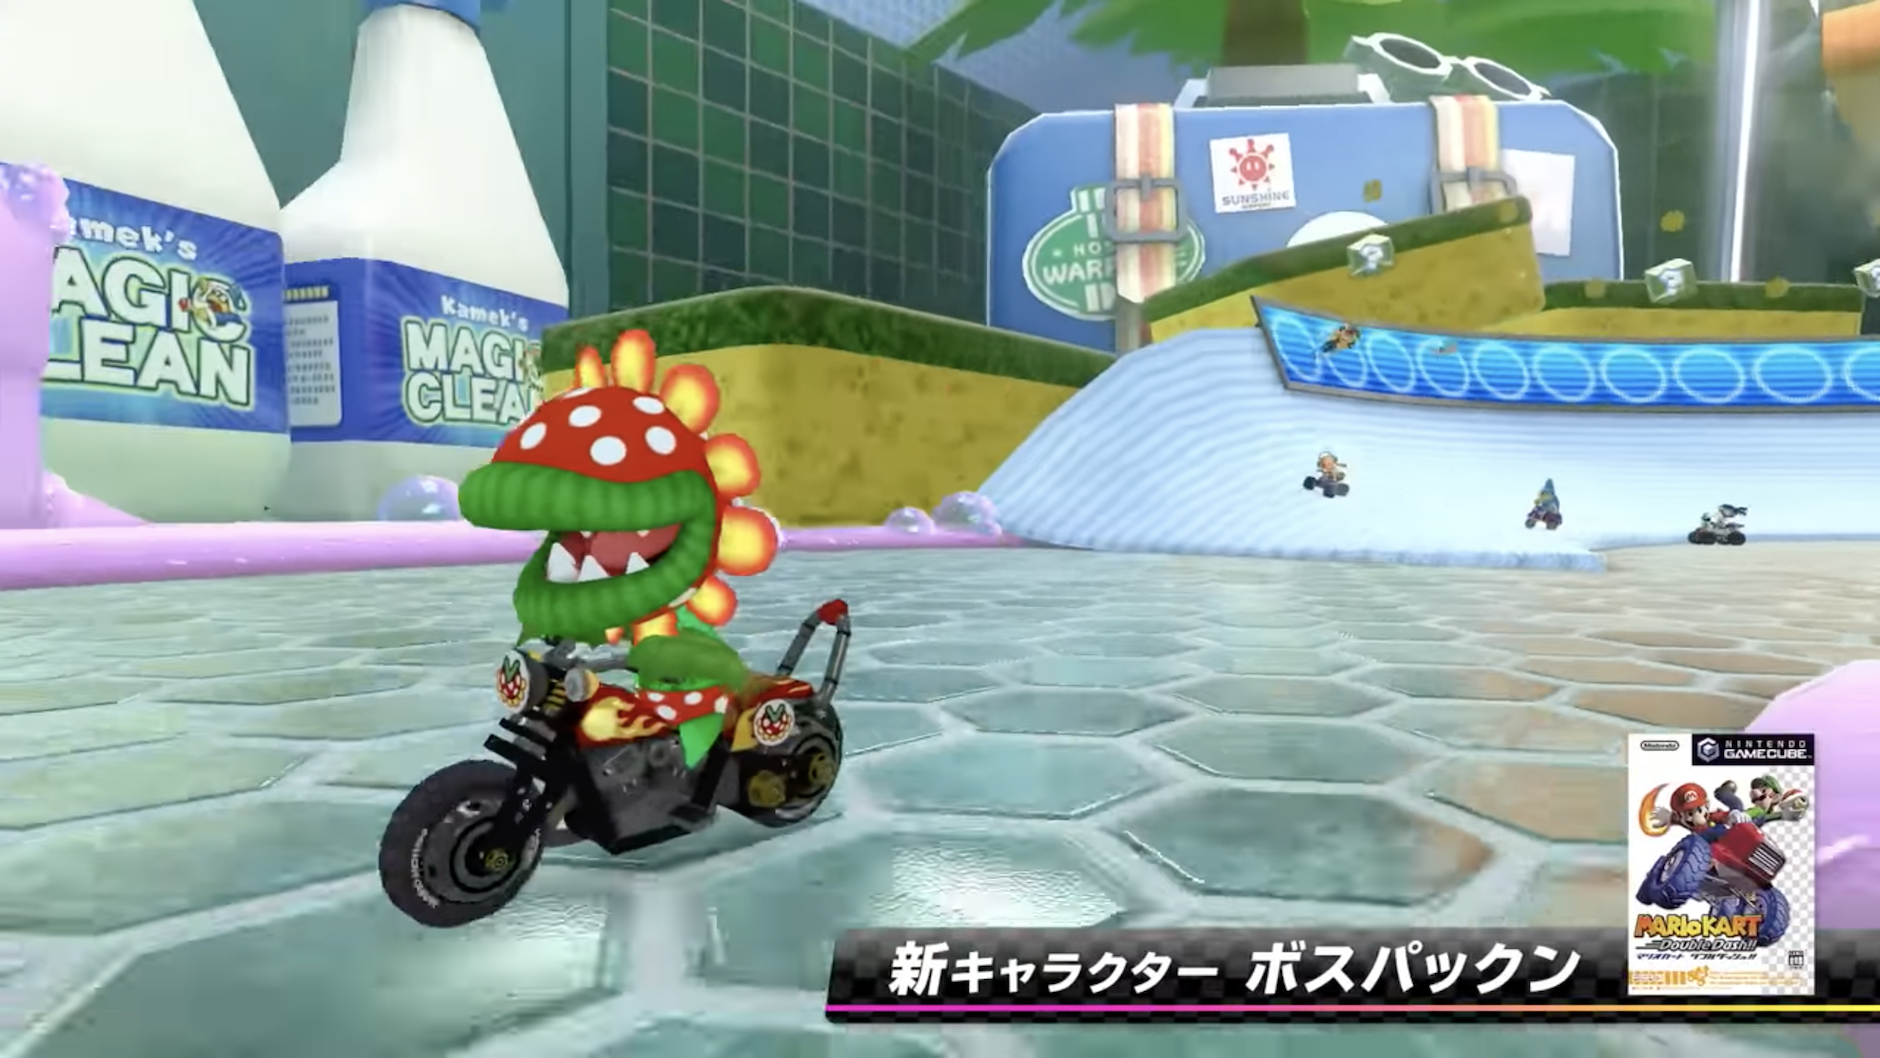 Mario Kart 8 Booster Pass Update 5 Revealed, Arriving this Summer